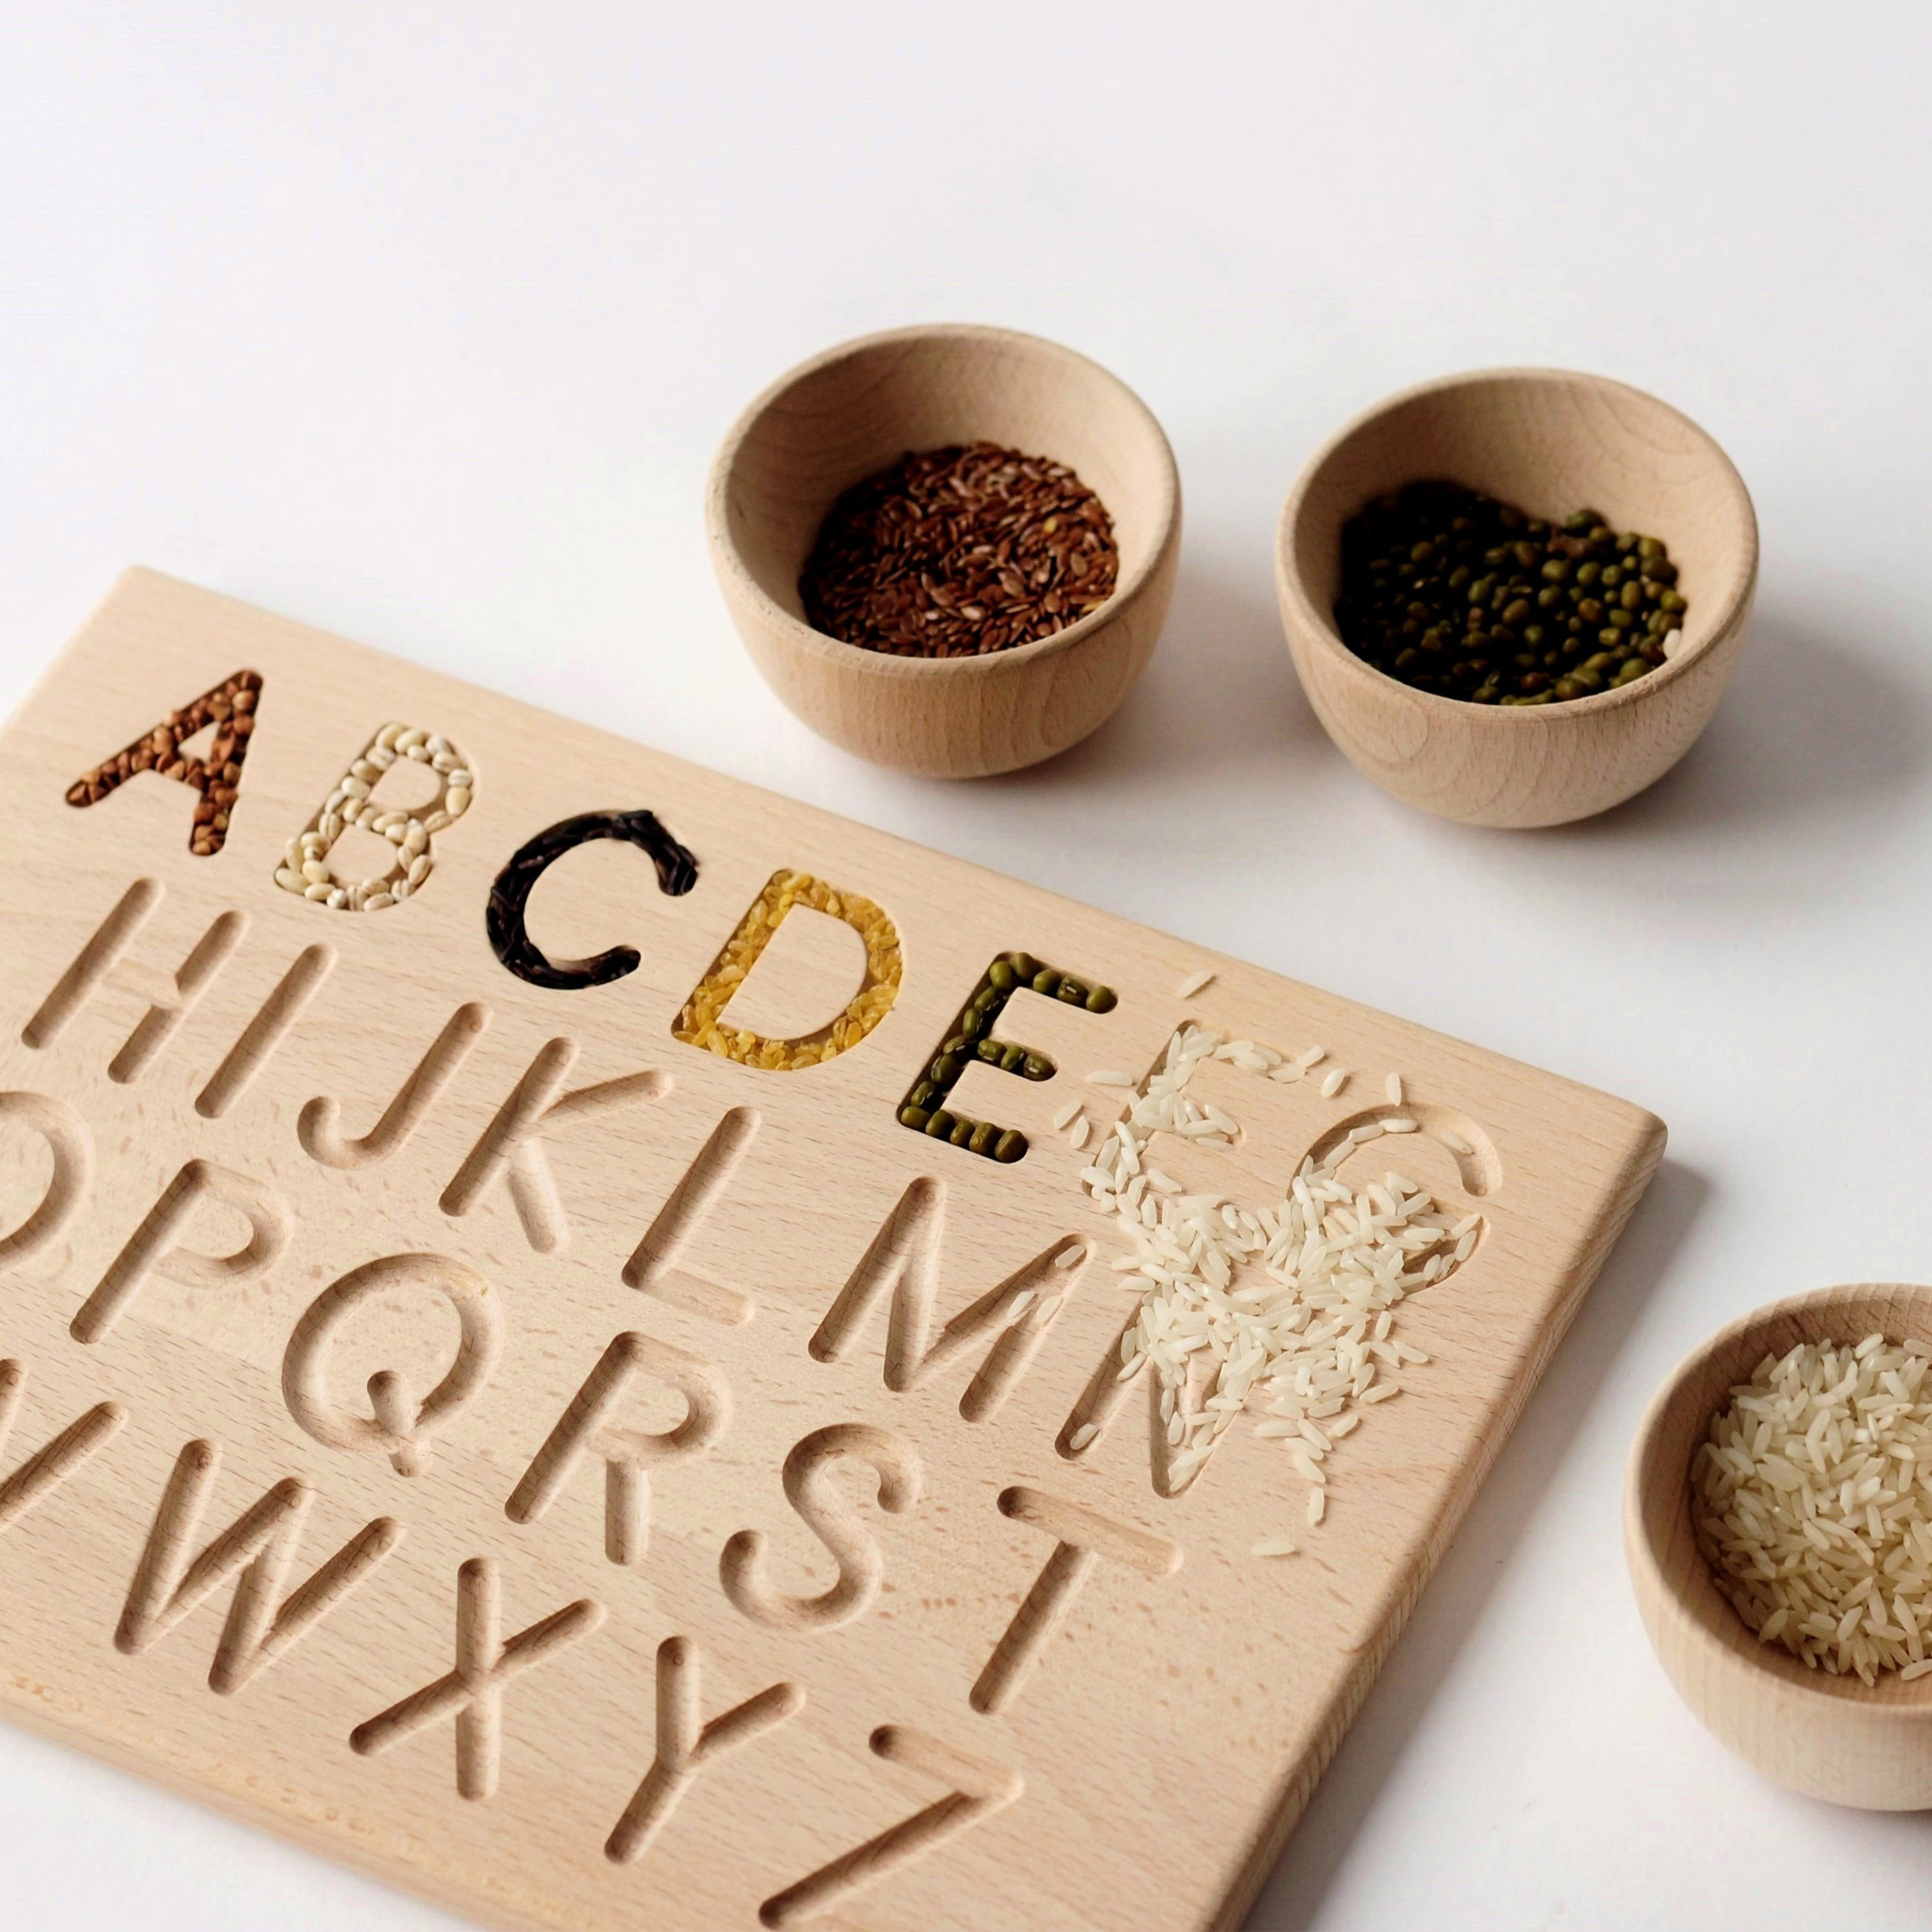 Double-sided Alphabet Tracing Board Solid Wood 